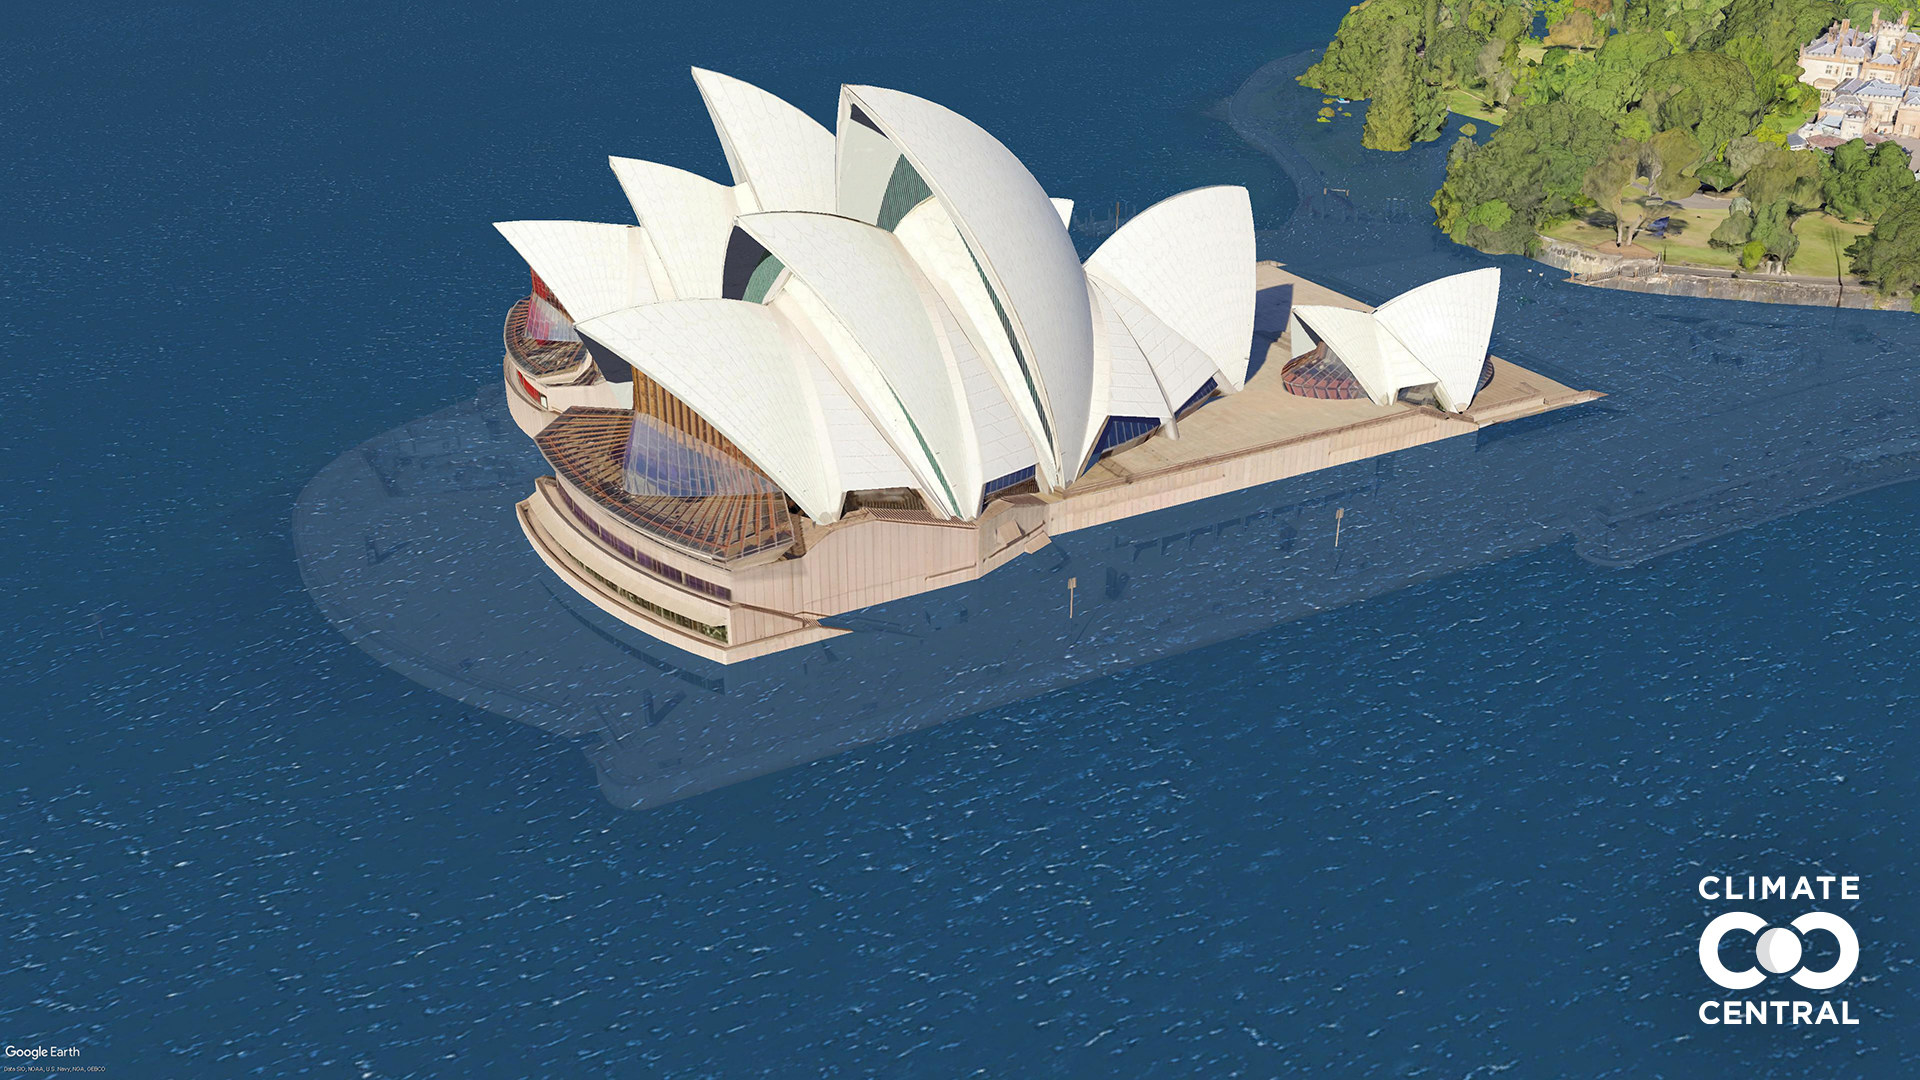 Water surrounds the opera house and cuts it off from the mainland